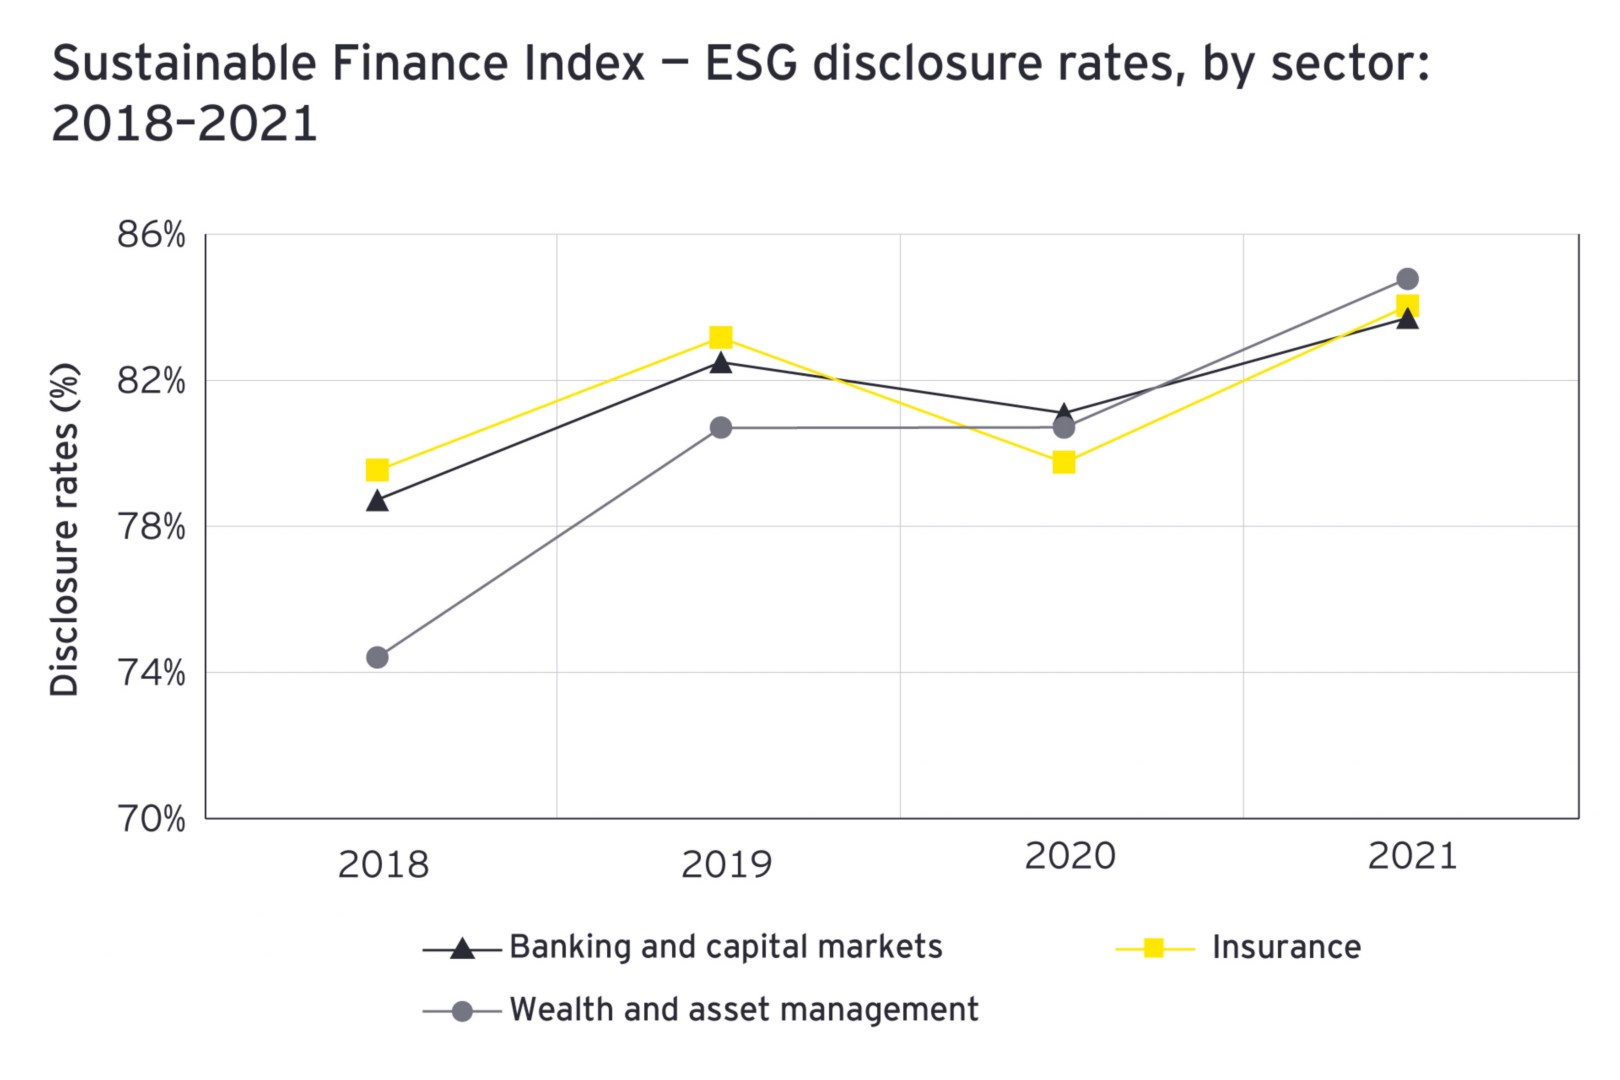 Sustainable Finance Index - ESG discolsure rates, by sector: 2018 - 2021